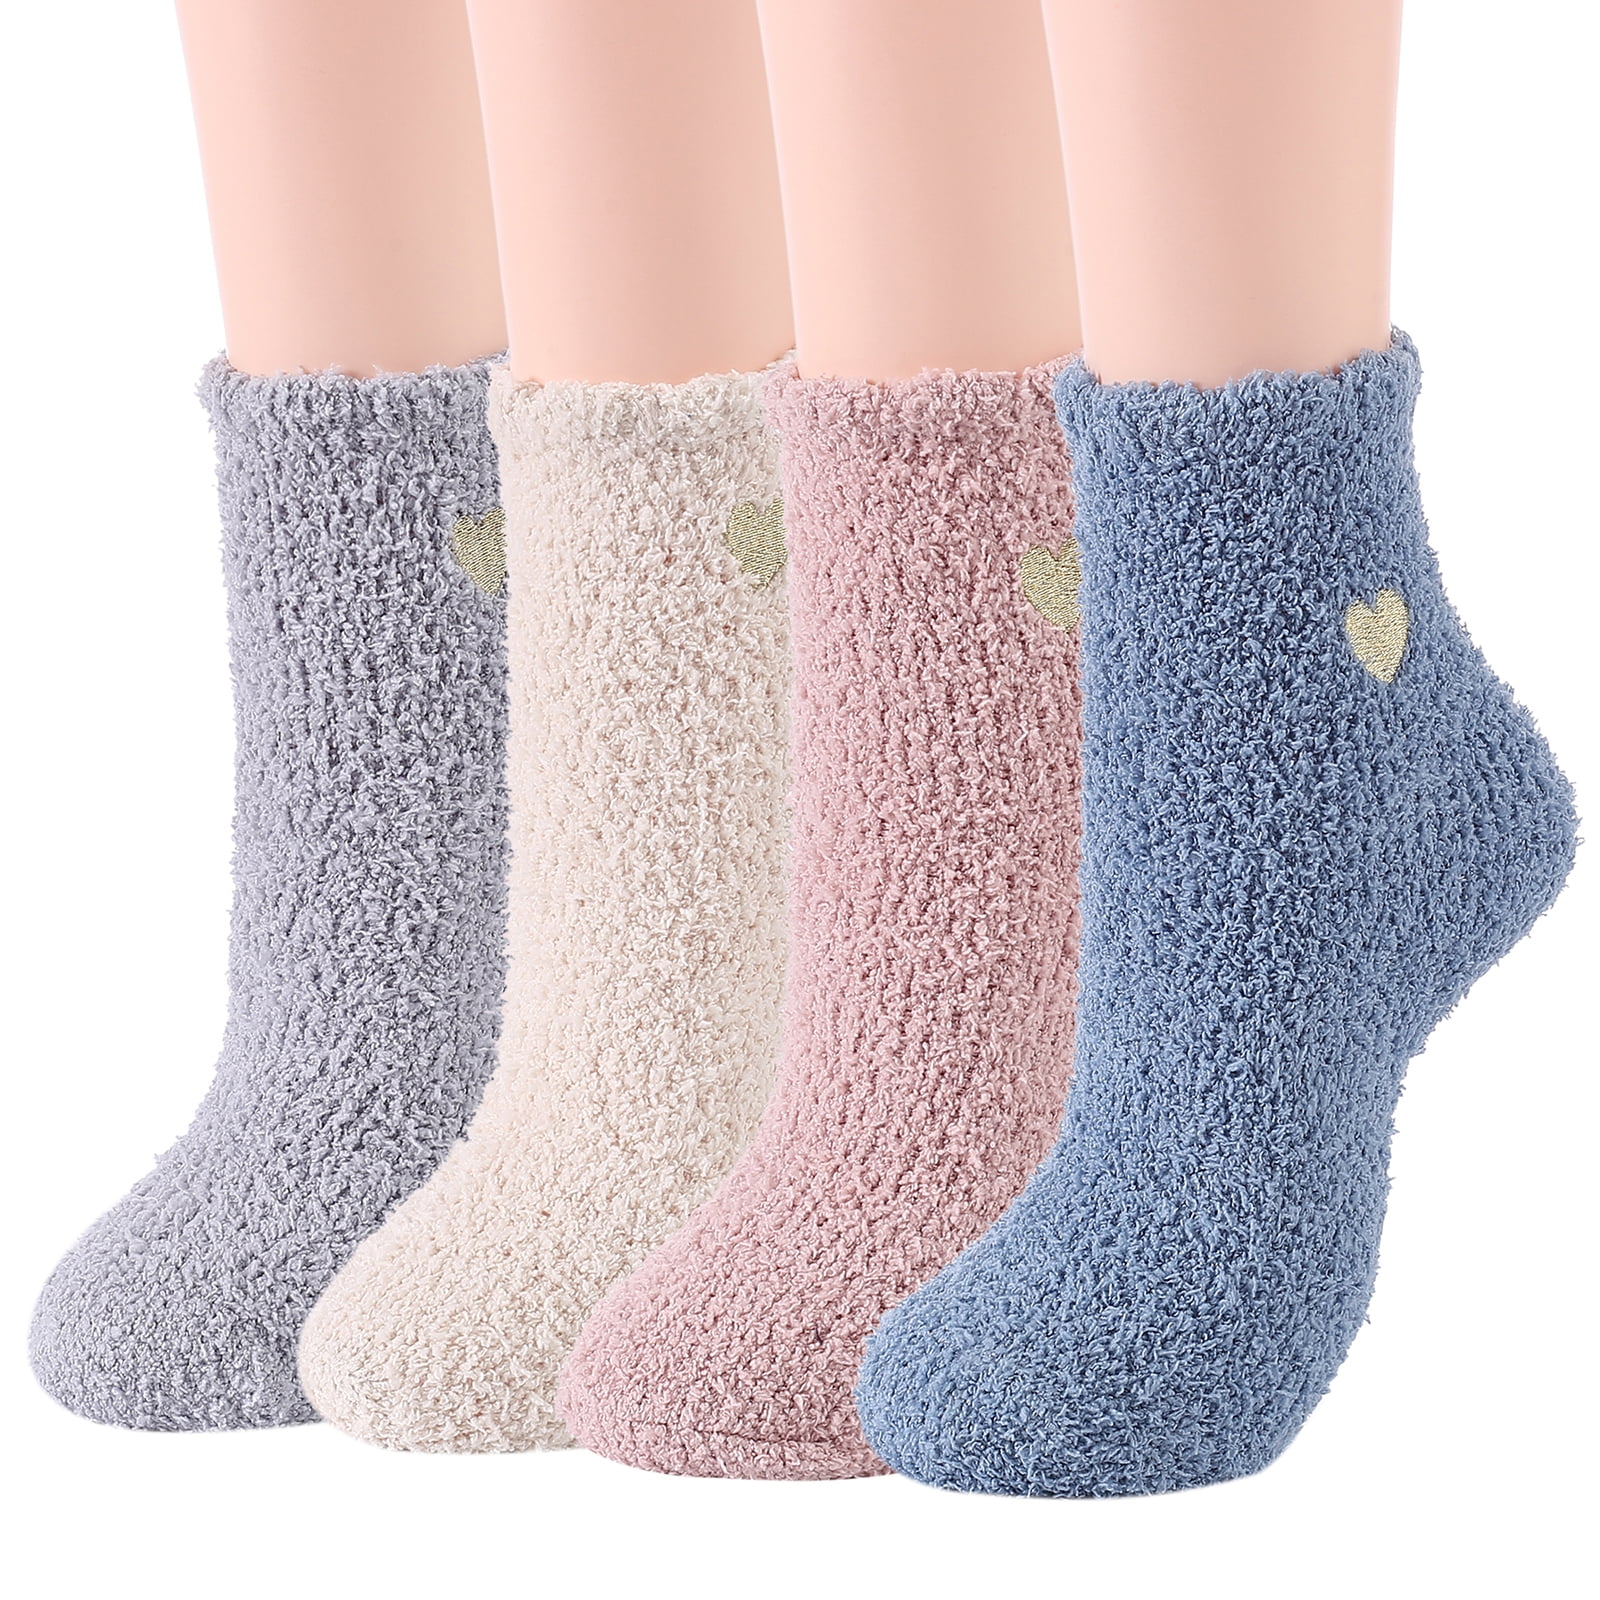 6X NEW WOMENS LADIES SOFT WARM COSY THERMAL BRUSHED FLEECE BED LOUNGE SOCKS 4-7 